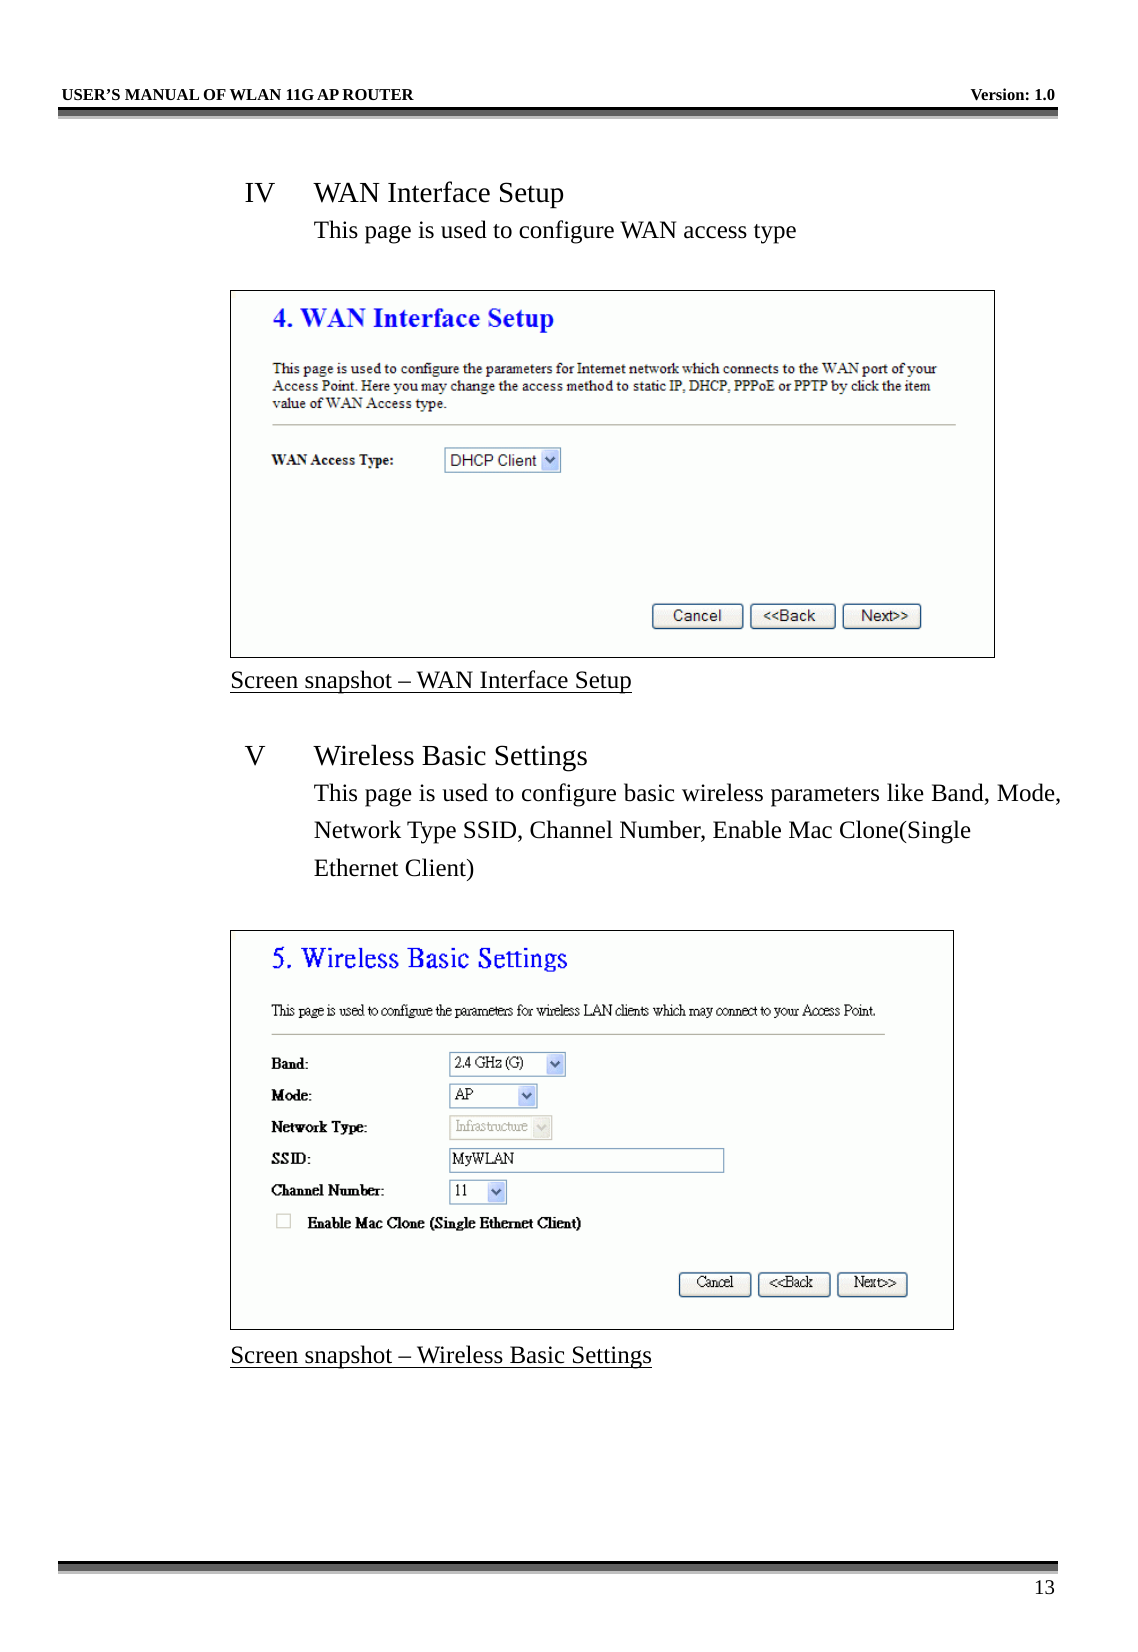   USER’S MANUAL OF WLAN 11G AP ROUTER    Version: 1.0     13  IV  WAN Interface Setup This page is used to configure WAN access type   Screen snapshot – WAN Interface Setup  V  Wireless Basic Settings This page is used to configure basic wireless parameters like Band, Mode, Network Type SSID, Channel Number, Enable Mac Clone(Single Ethernet Client)   Screen snapshot – Wireless Basic Settings  